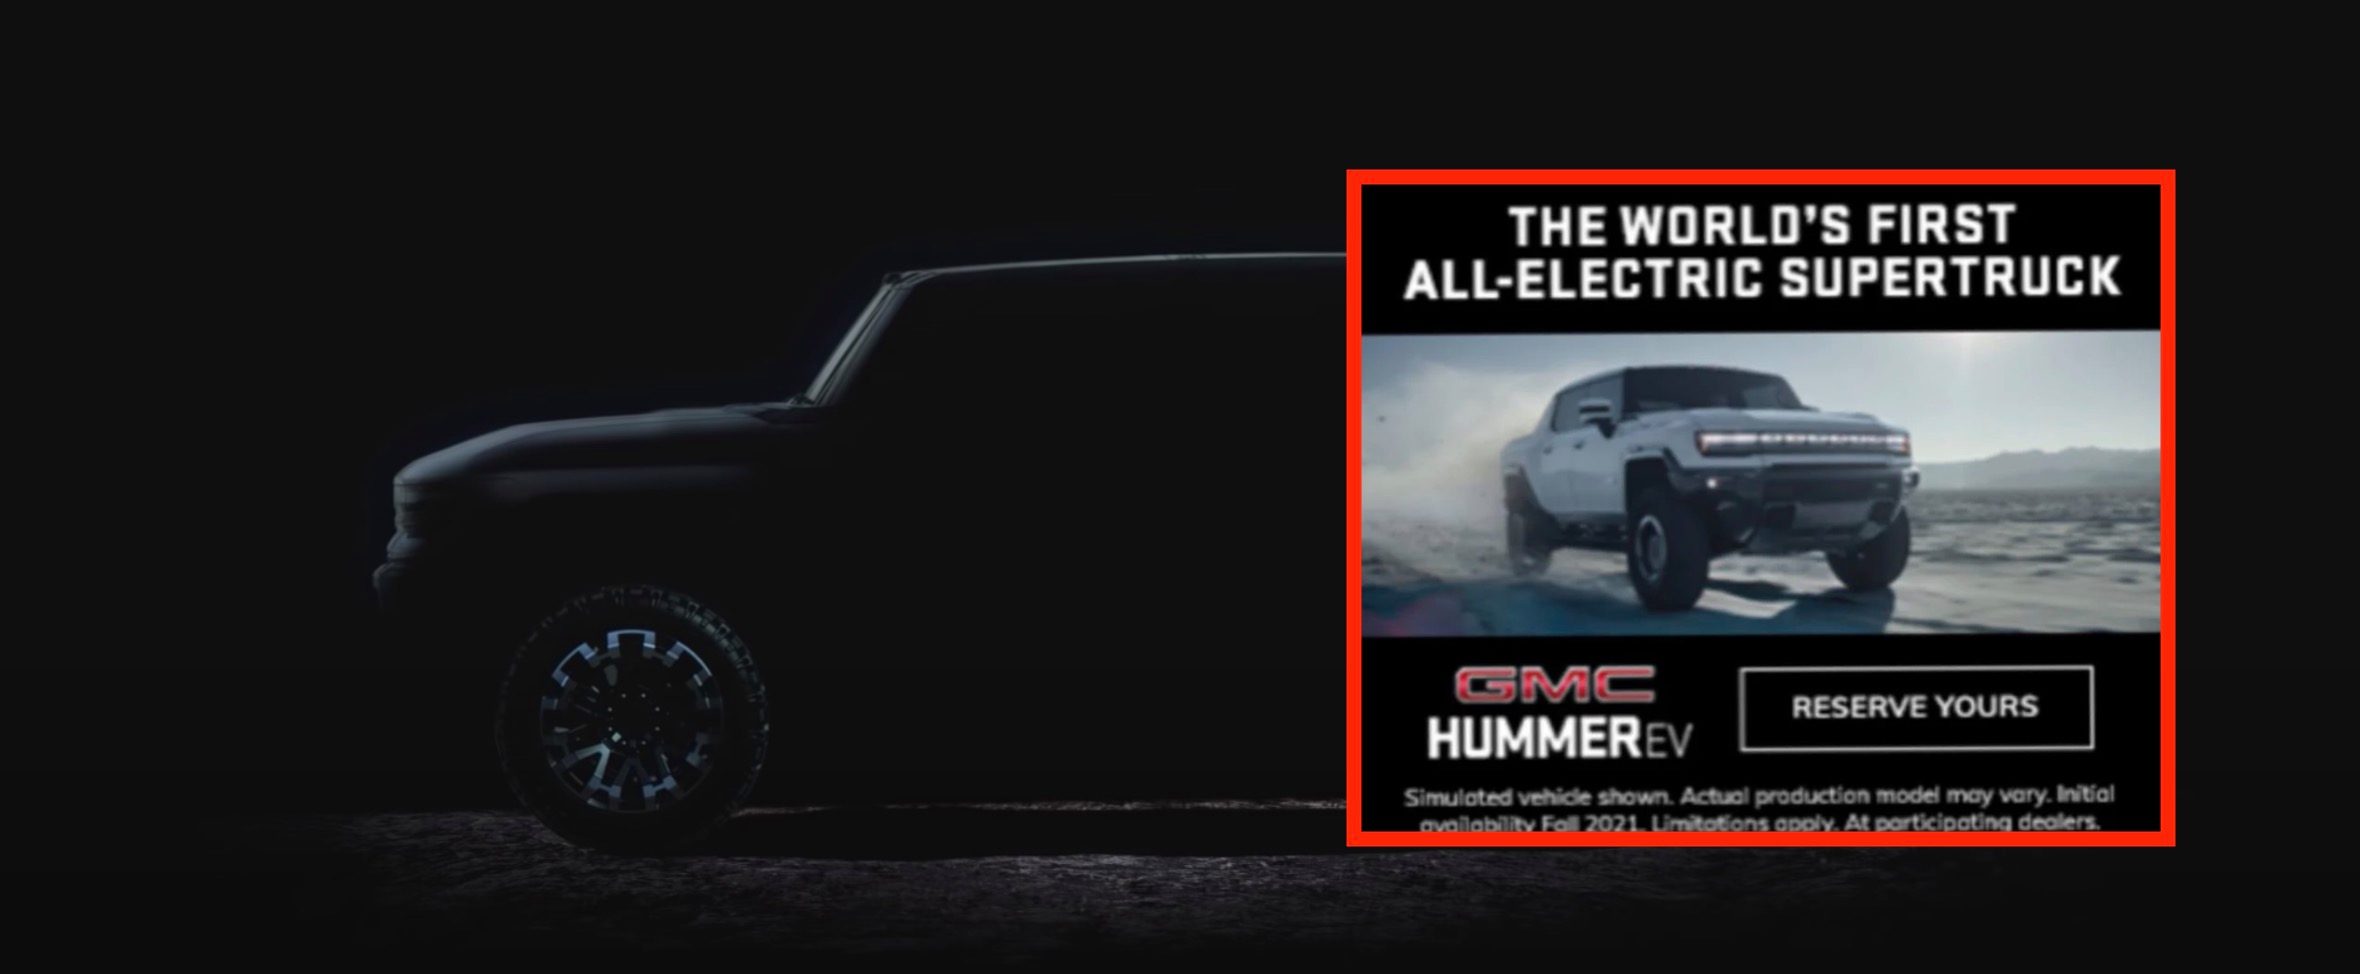 Design of the GMC Hummer EV pickup electric leaked in an ad before it was revealed